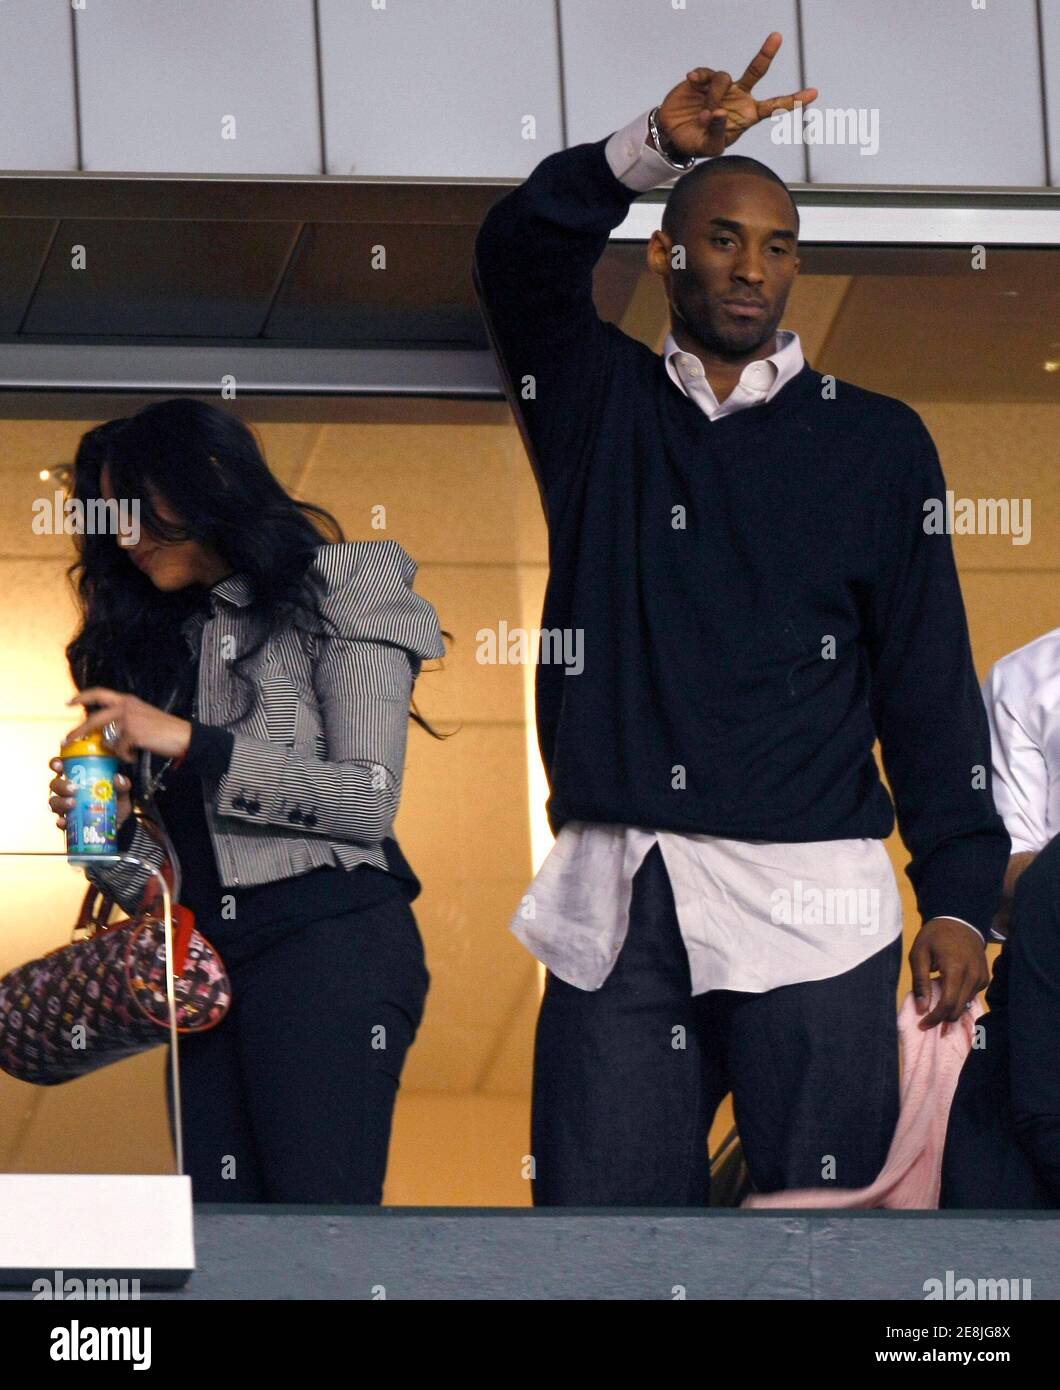 Basketball super star Kobe Bryant (R) waves to fans as he and wife Vanessa (L) leave the Major League Soccer game between the Los Angeles Galaxy and San Jose Earthquakes in Carson, California  April 3, 2008.    REUTERS/Mike Blake      (UNITED STATES) Stock Photo